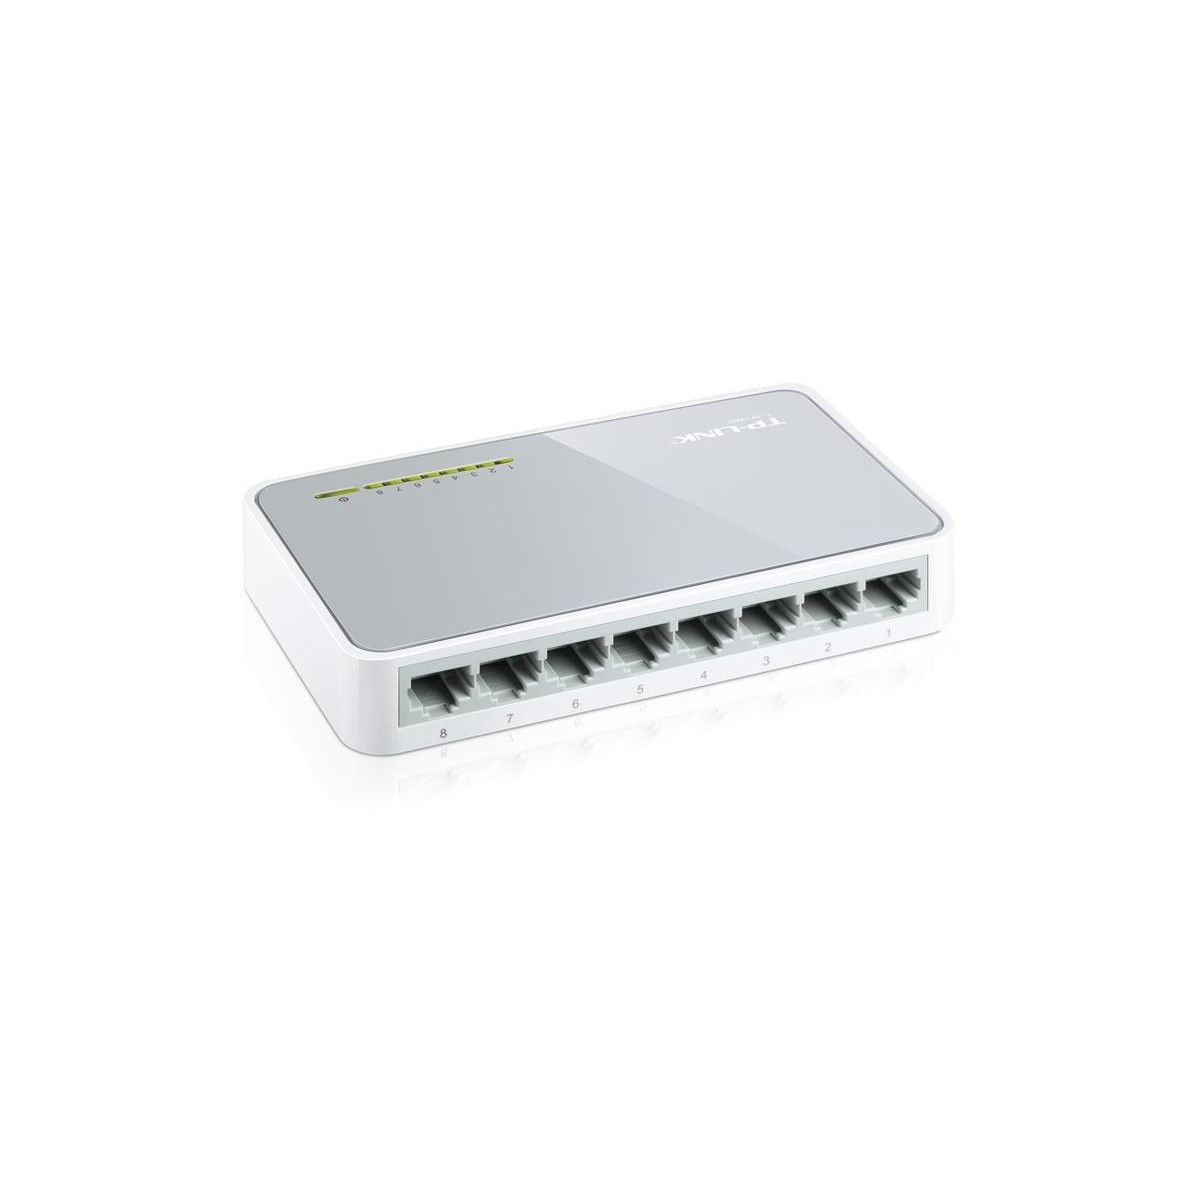 More about Switch TP-LINK TL-SF1008D